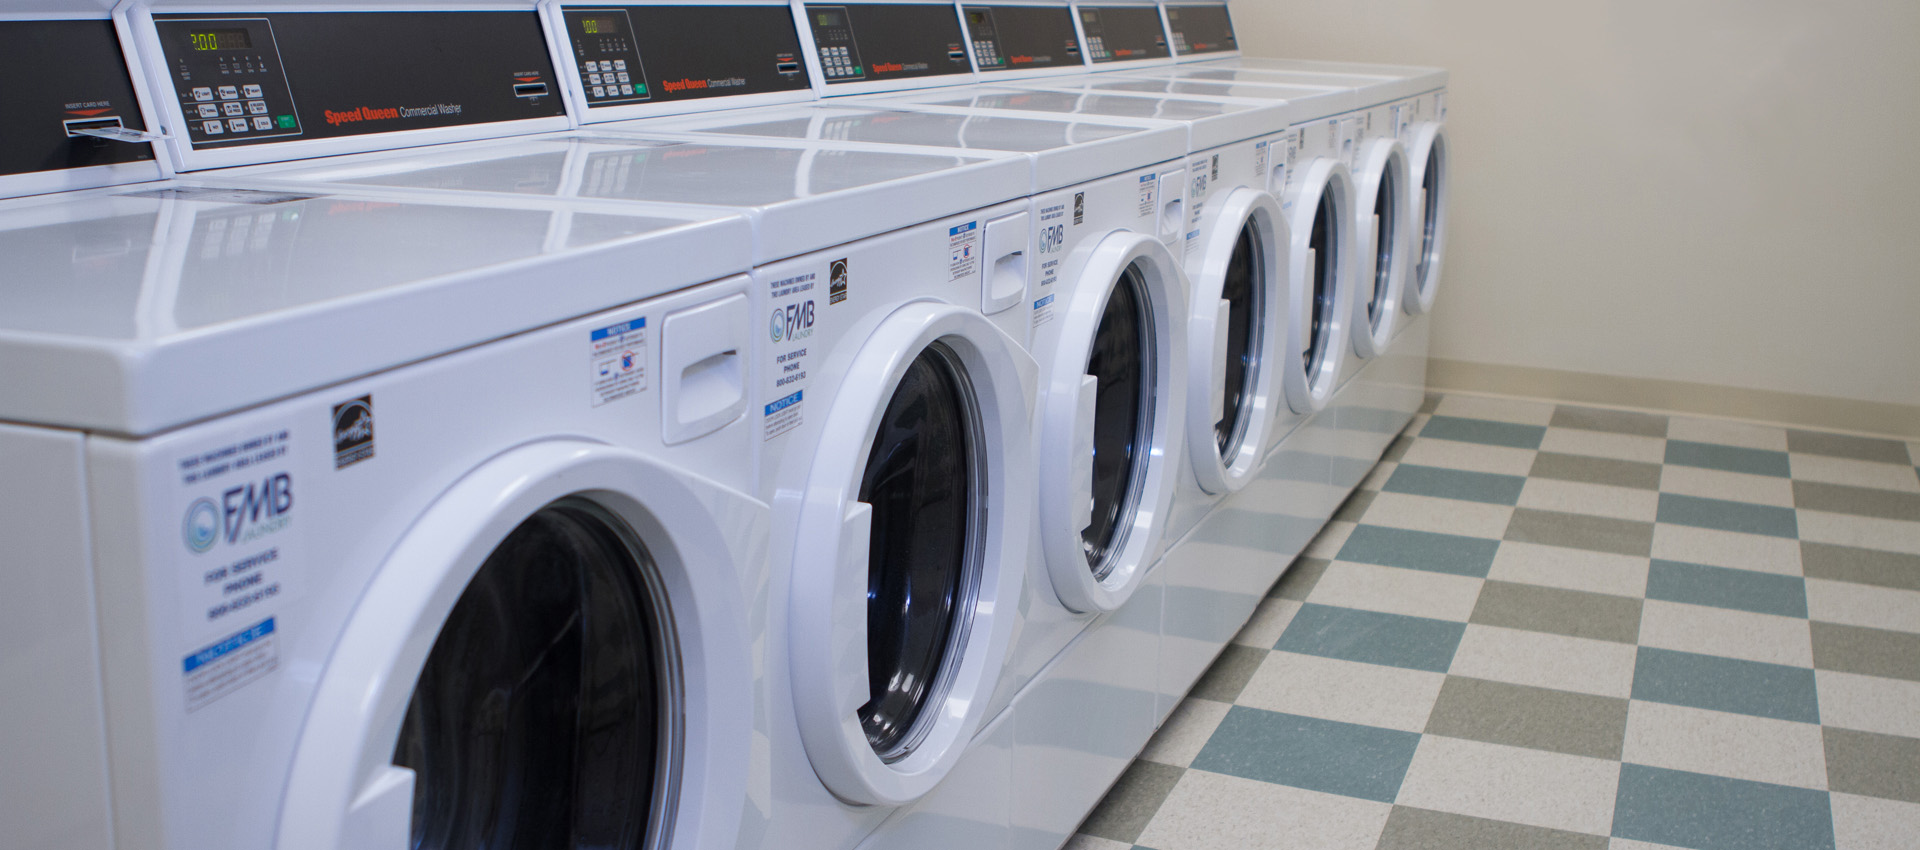 Impacted By New Laundry Lease Fees?